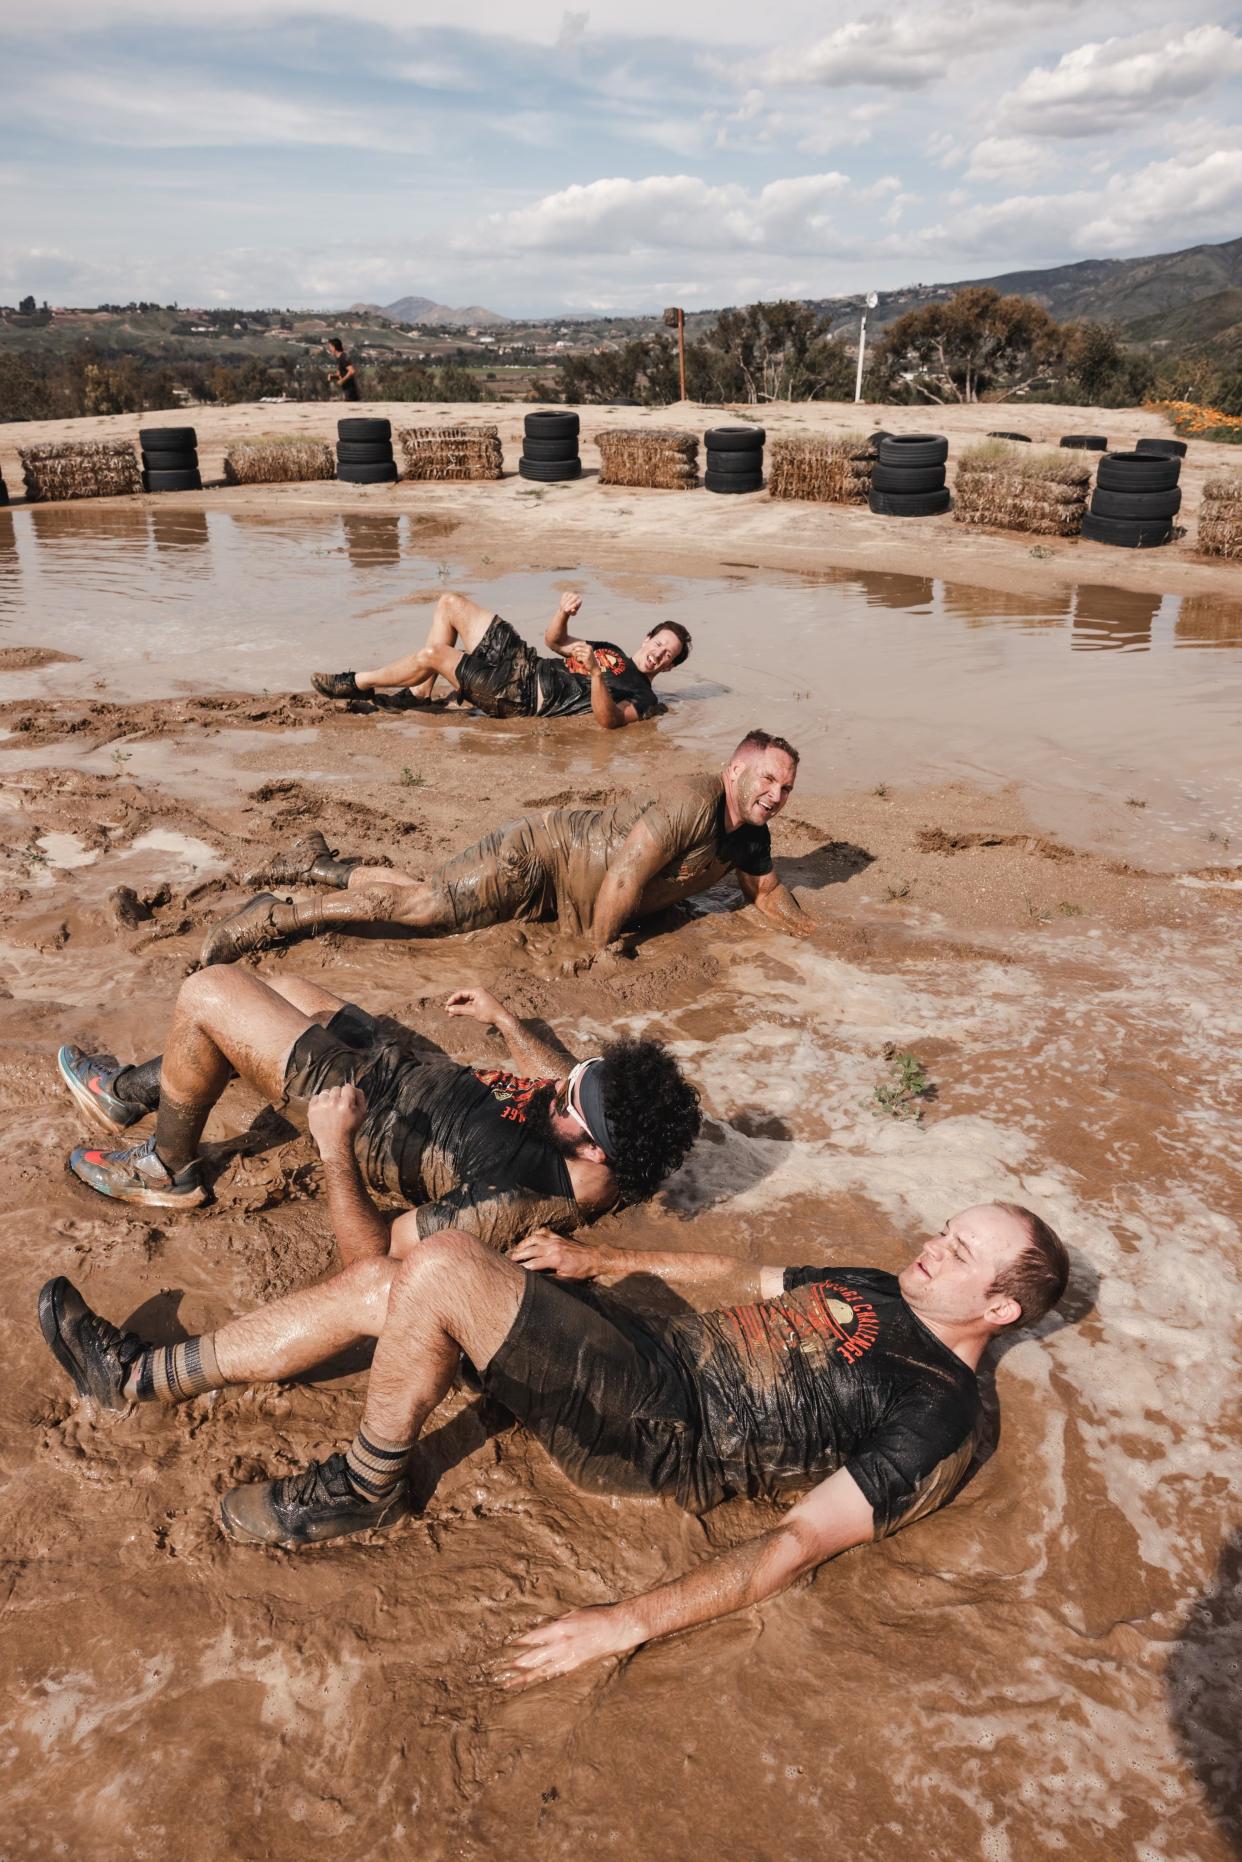 The Misogi Challenge with We Are The They involved 12 hours of grueling physical activities.